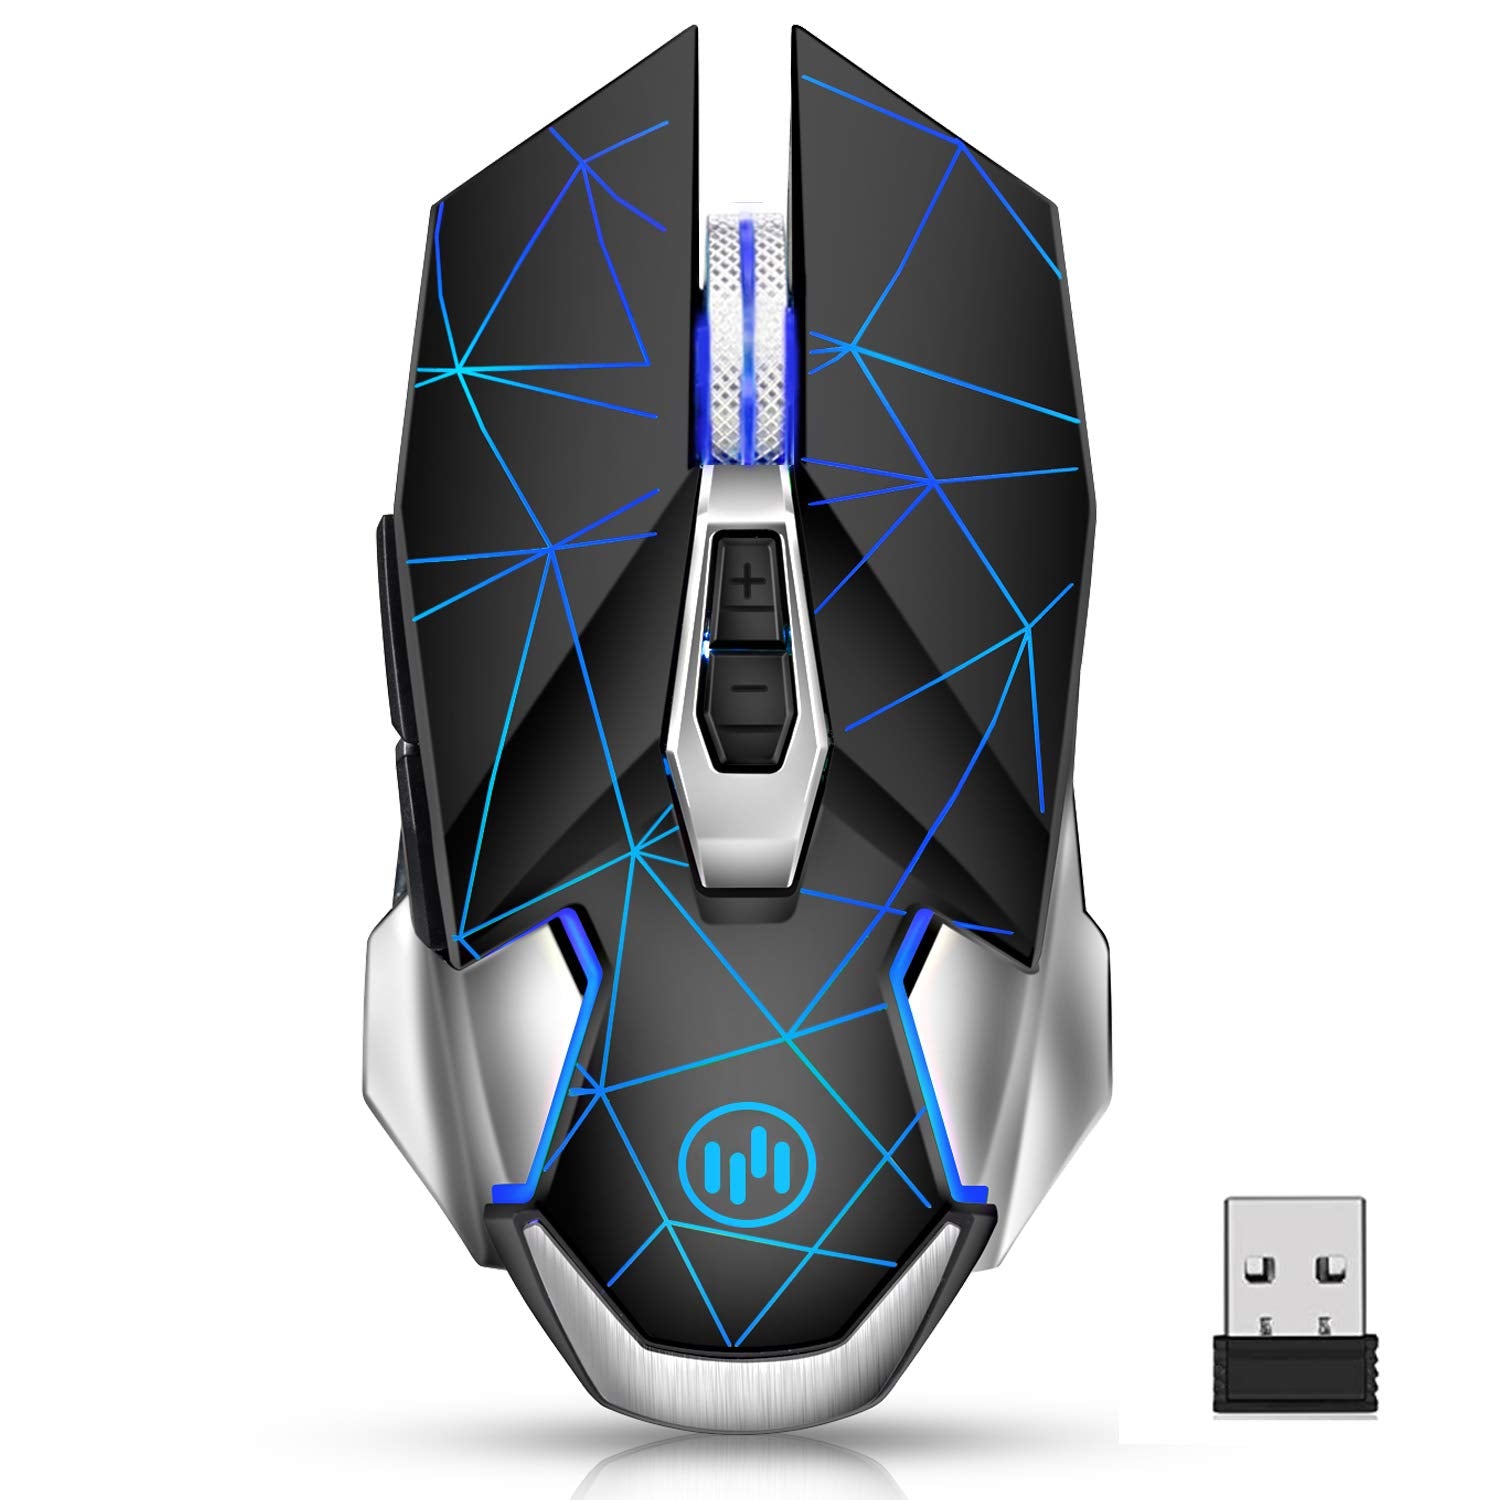 VEGCOO Rechargeable Wireless Gaming Mouse, 2.4GHz RGB 7 Breathing Led Light Laptop Gaming Mouse Silent Click 2400 DPI Iron scroll wheel Iron Plate Computer Gaming Mouse for PC Laptop Notebook Desktop